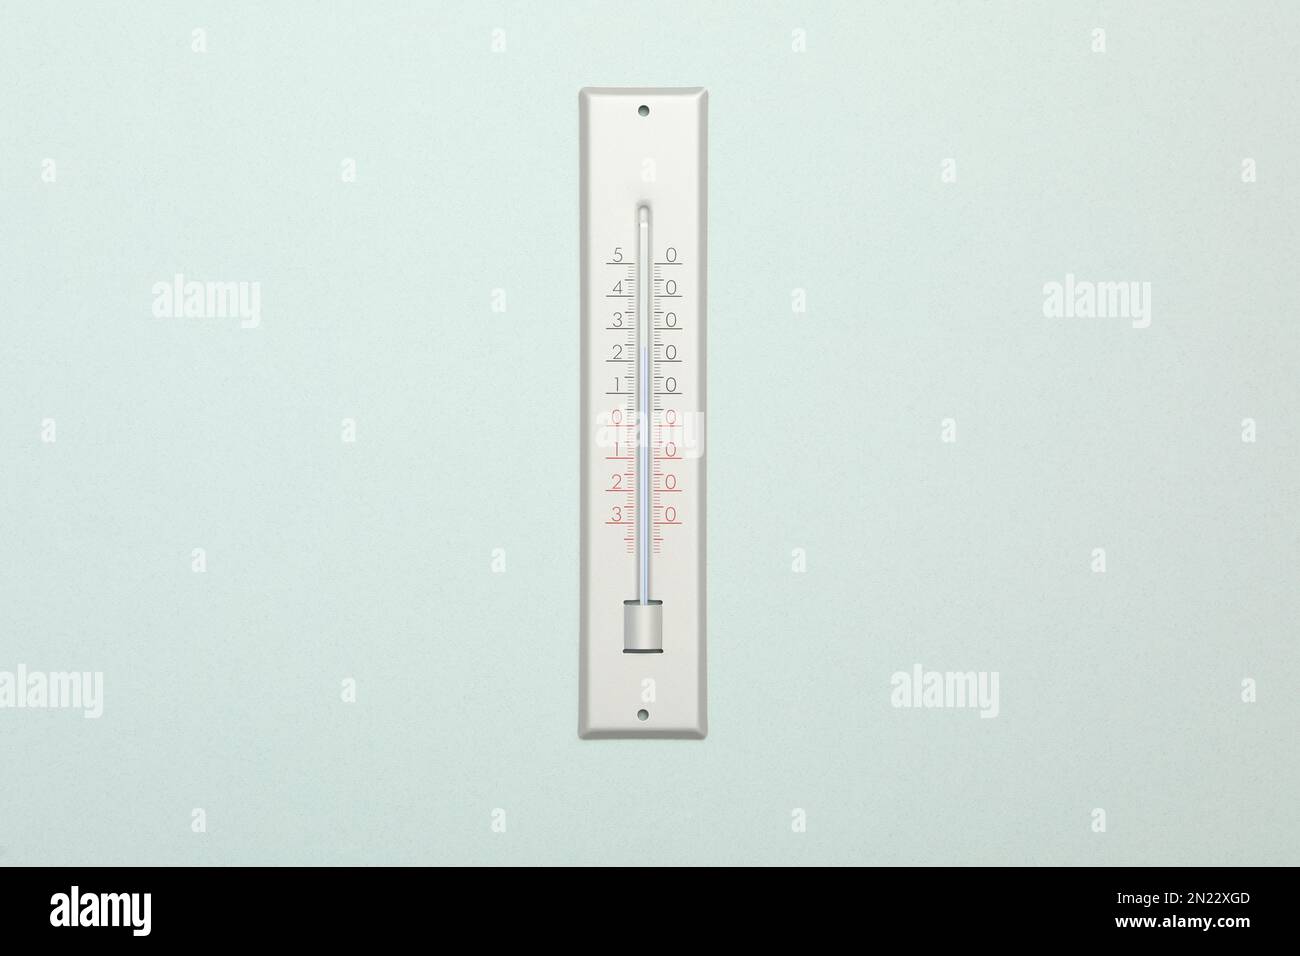 https://c8.alamy.com/comp/2N22XGD/weather-thermometer-on-white-background-top-view-2N22XGD.jpg